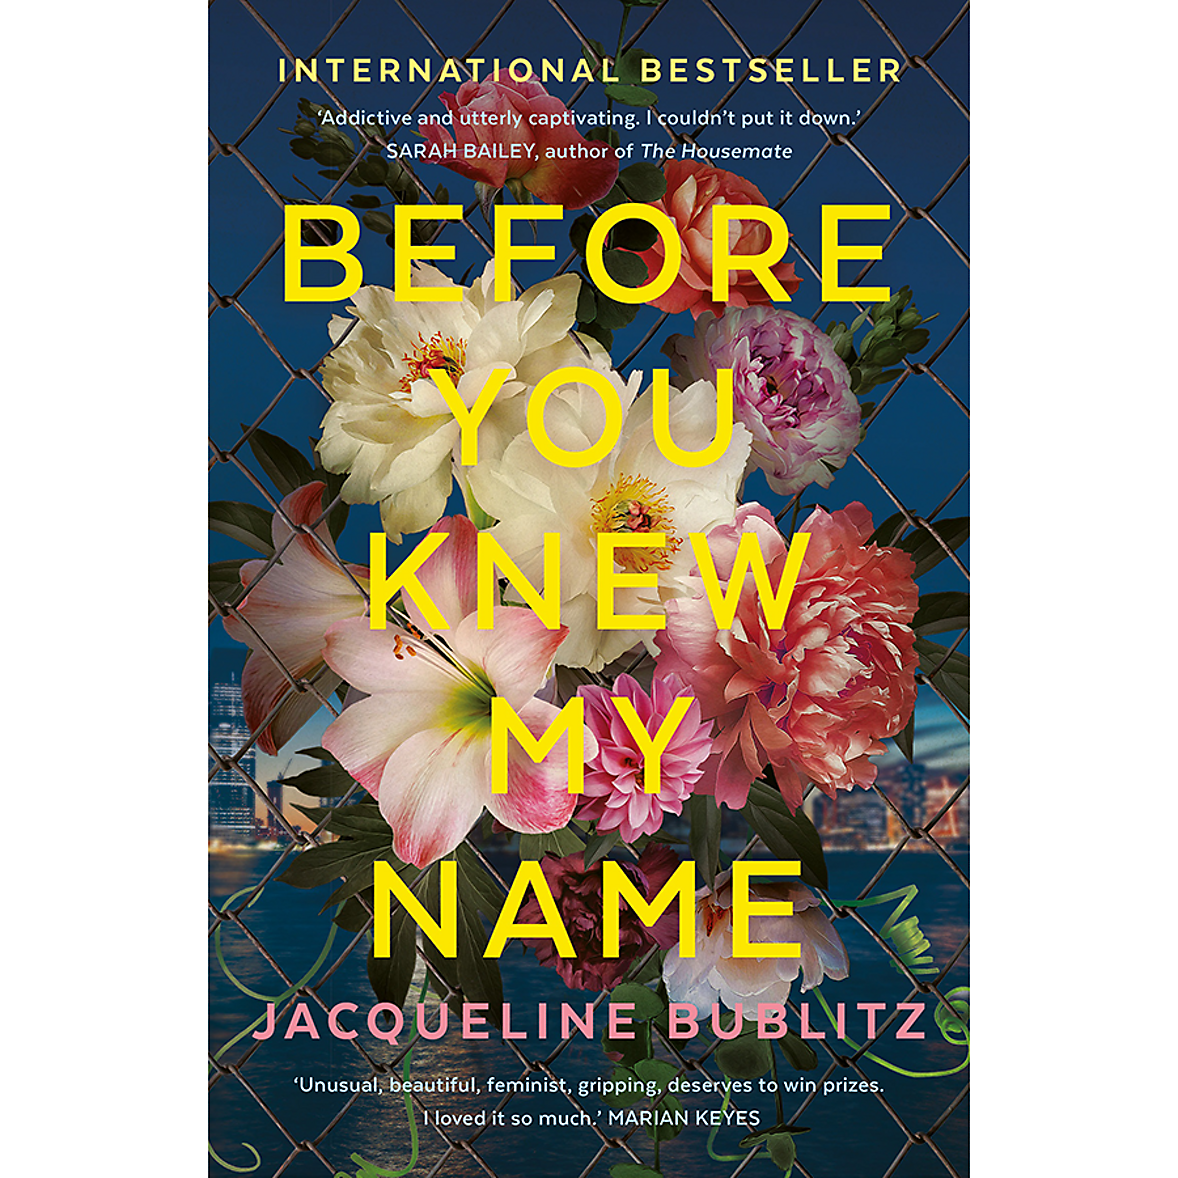 Before You Knew My Name by Jacqueline Bublitz